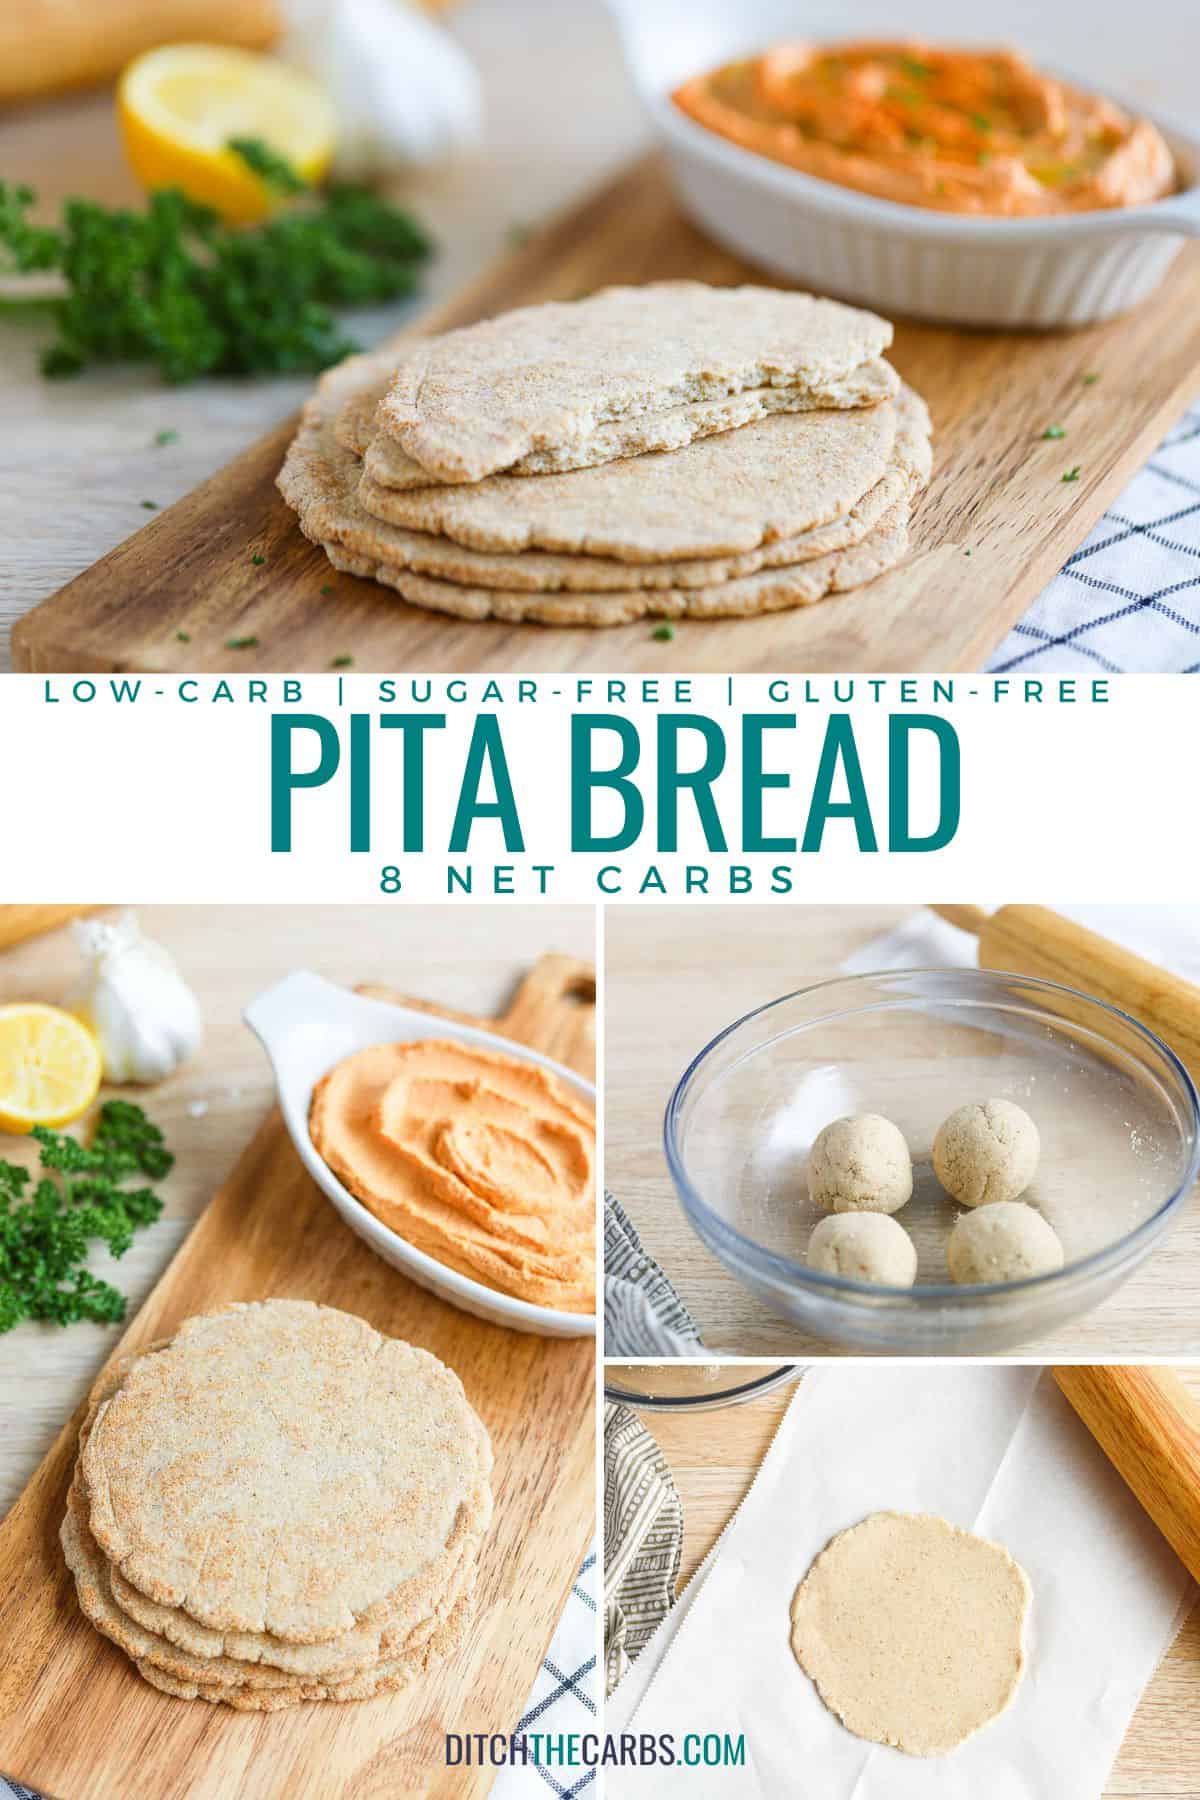 A collage showing low-carb pita bread being made at various stages.